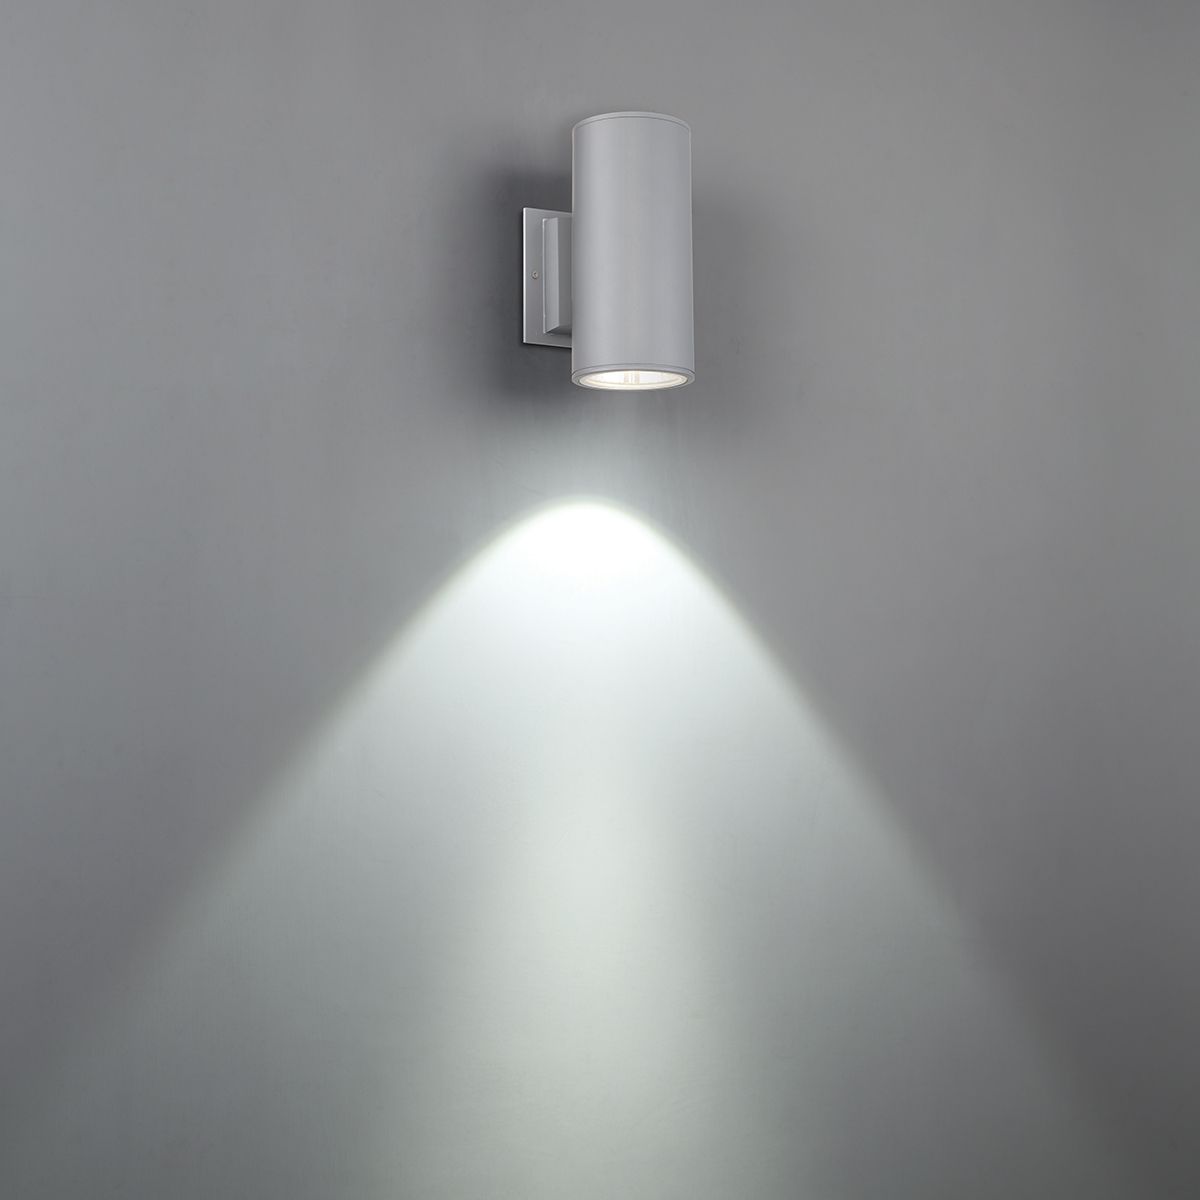 9 In 1 Light LED Outdoor Cylinder Wall Light 3000K Gray Finish